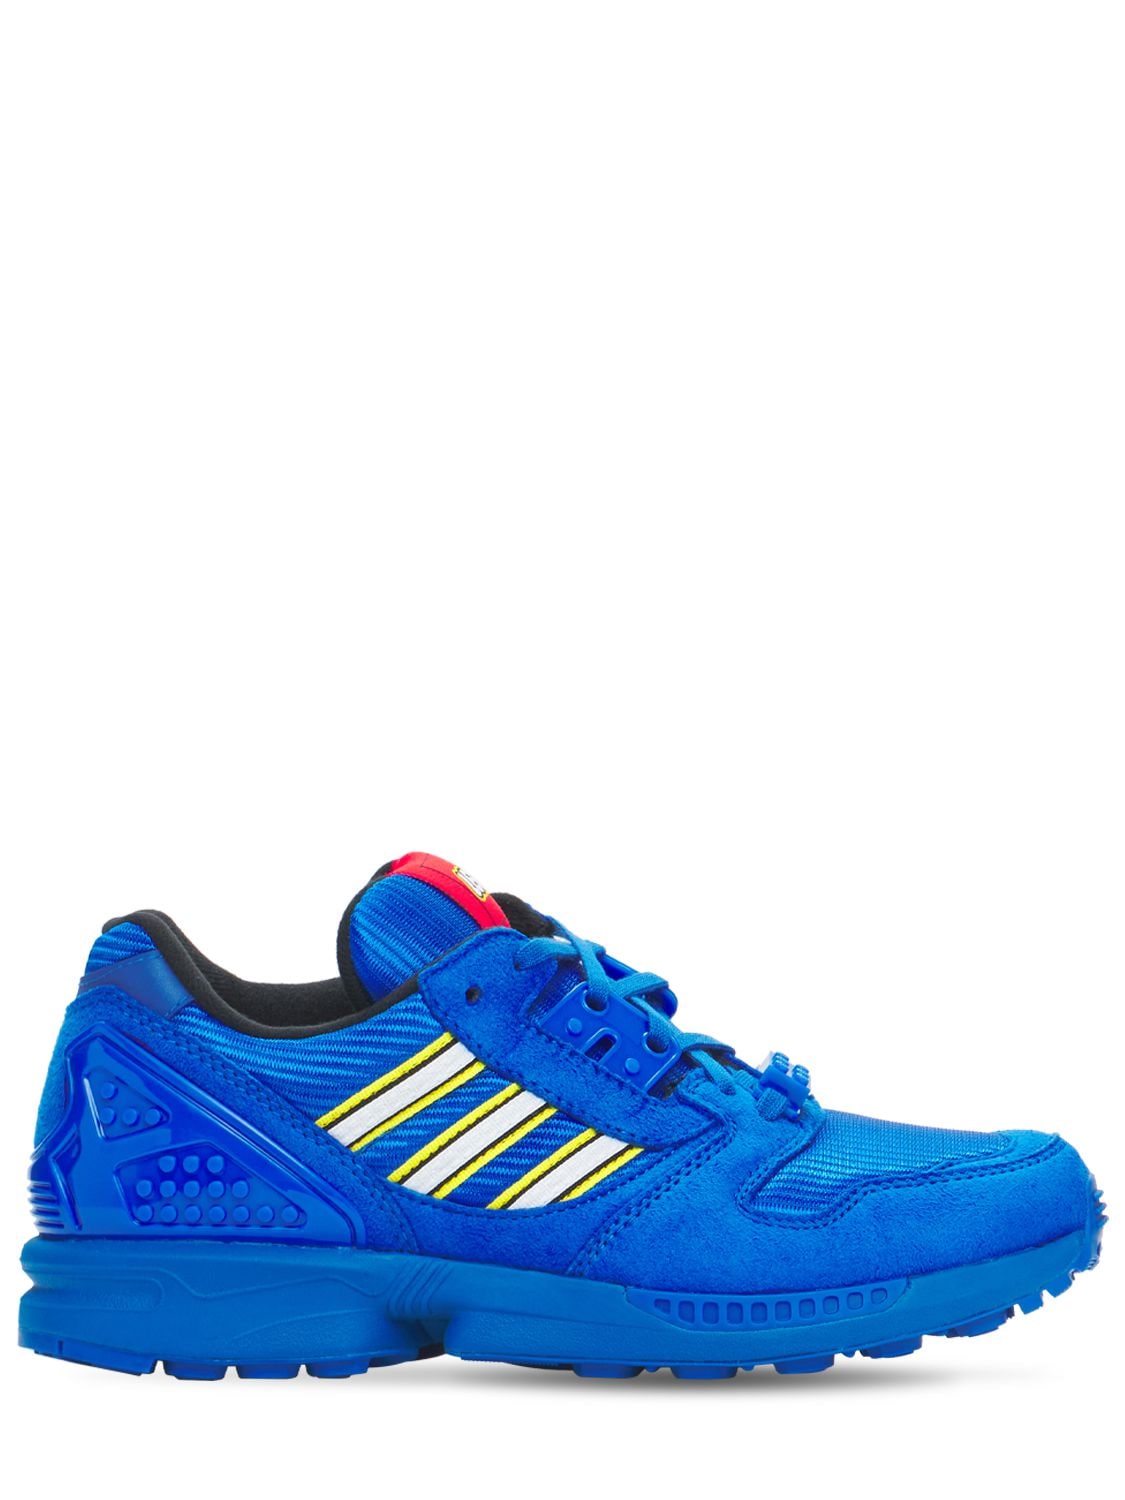 Adidas Originals Zx 8000 X Lego® Sneaker In Royal/ White/ Royal